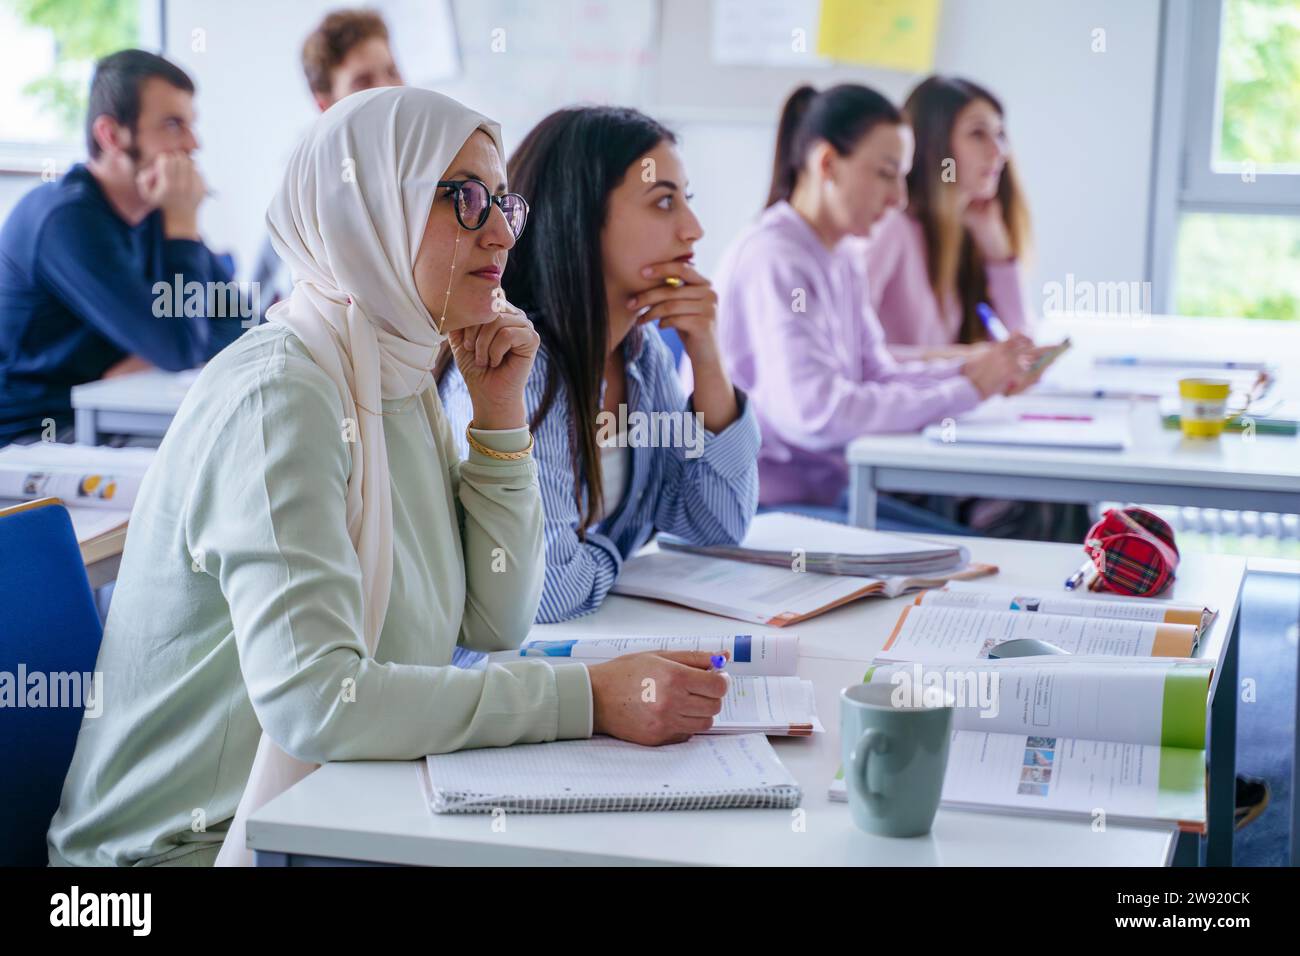 Multi-ethnic students at desk studying together in classroom Stock Photo